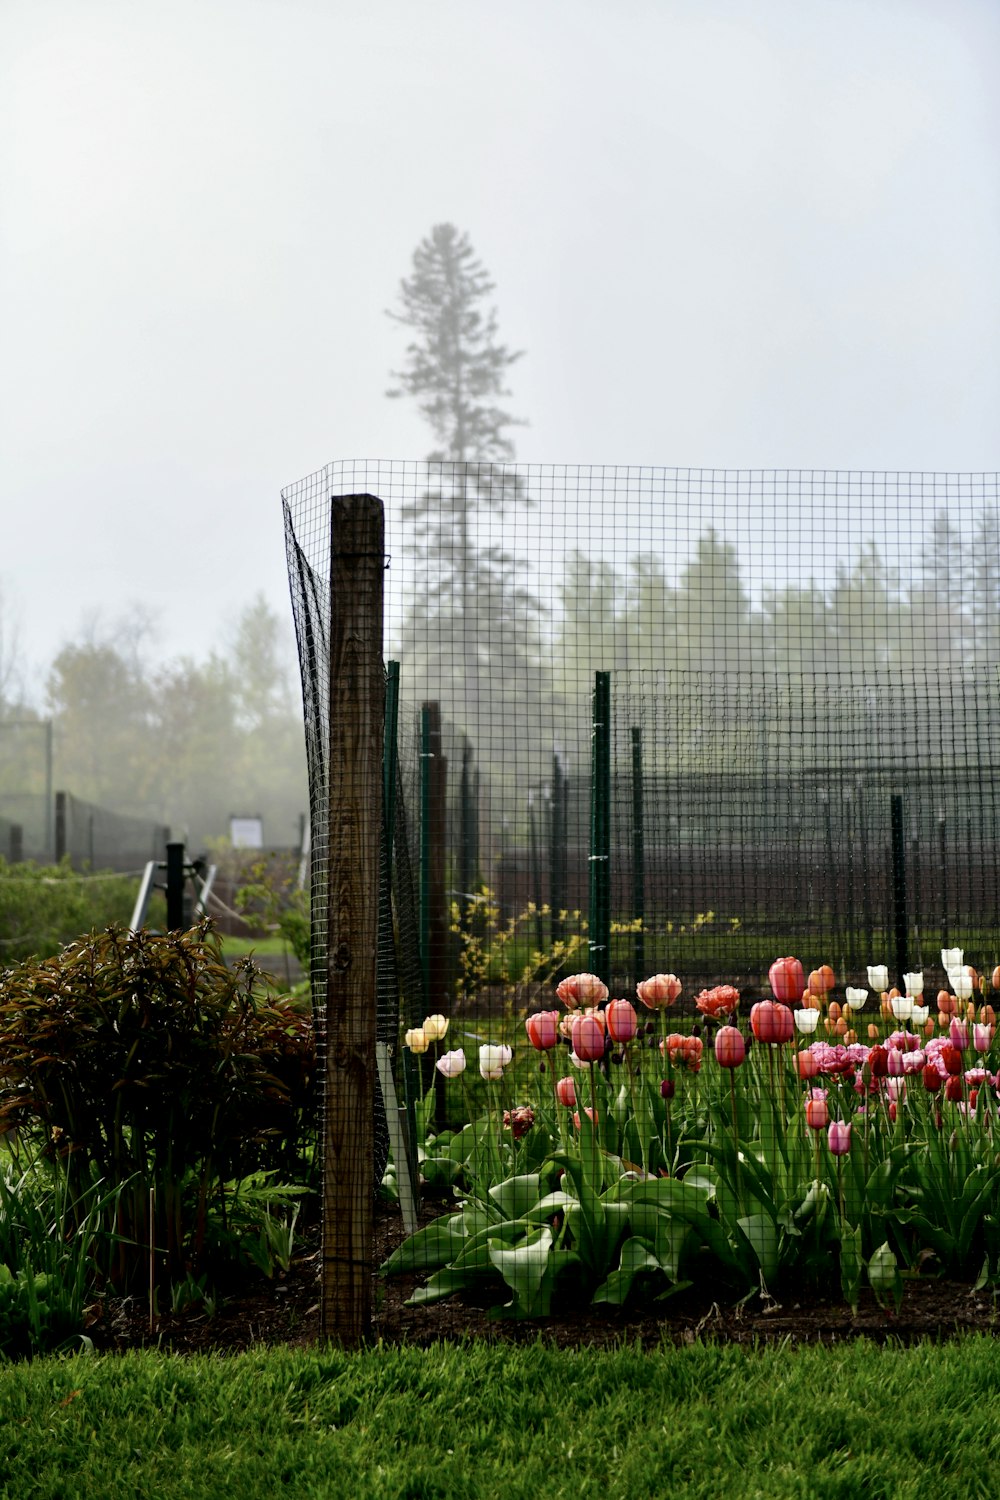 a field of tulips and other flowers behind a fence